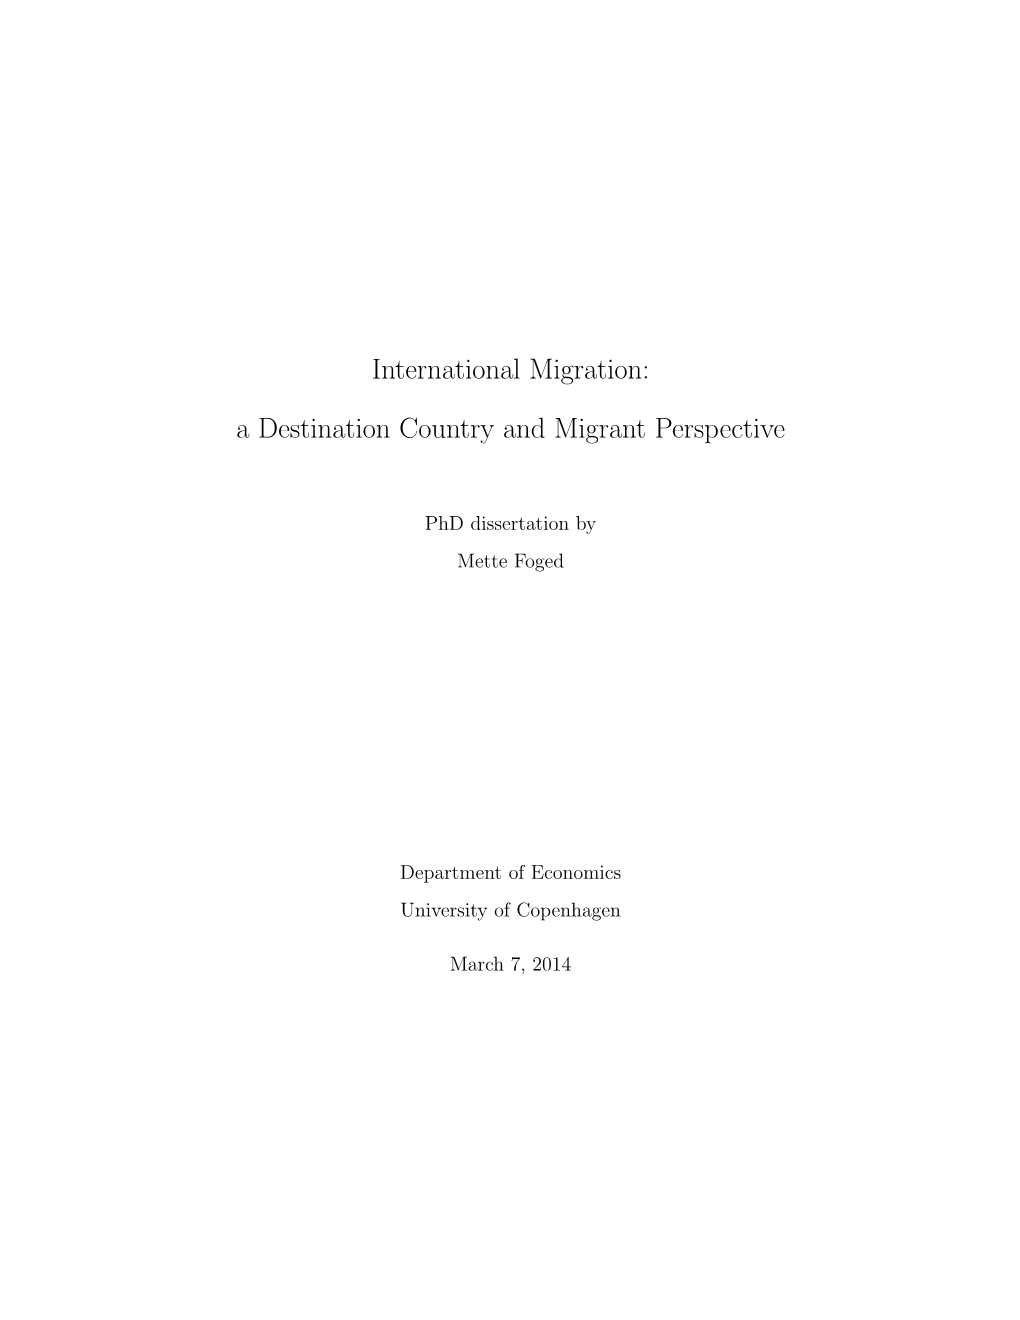 International Migration: a Destination Country and Migrant Perspective